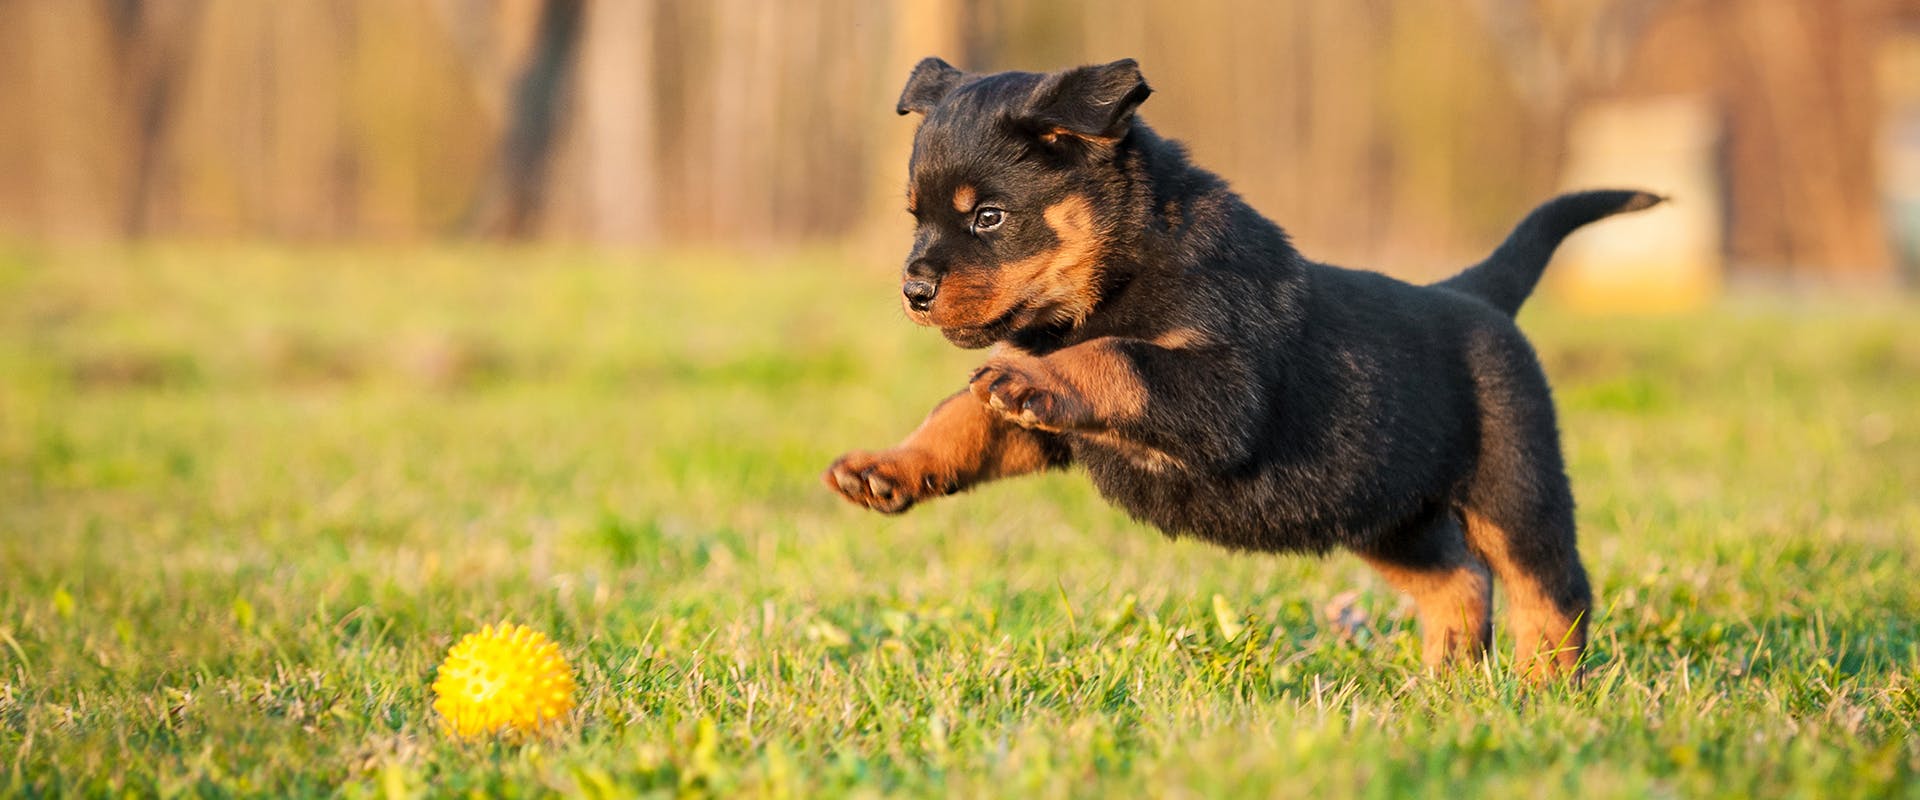 A small Rottweiler puppy pouncing on a yellow chew toy